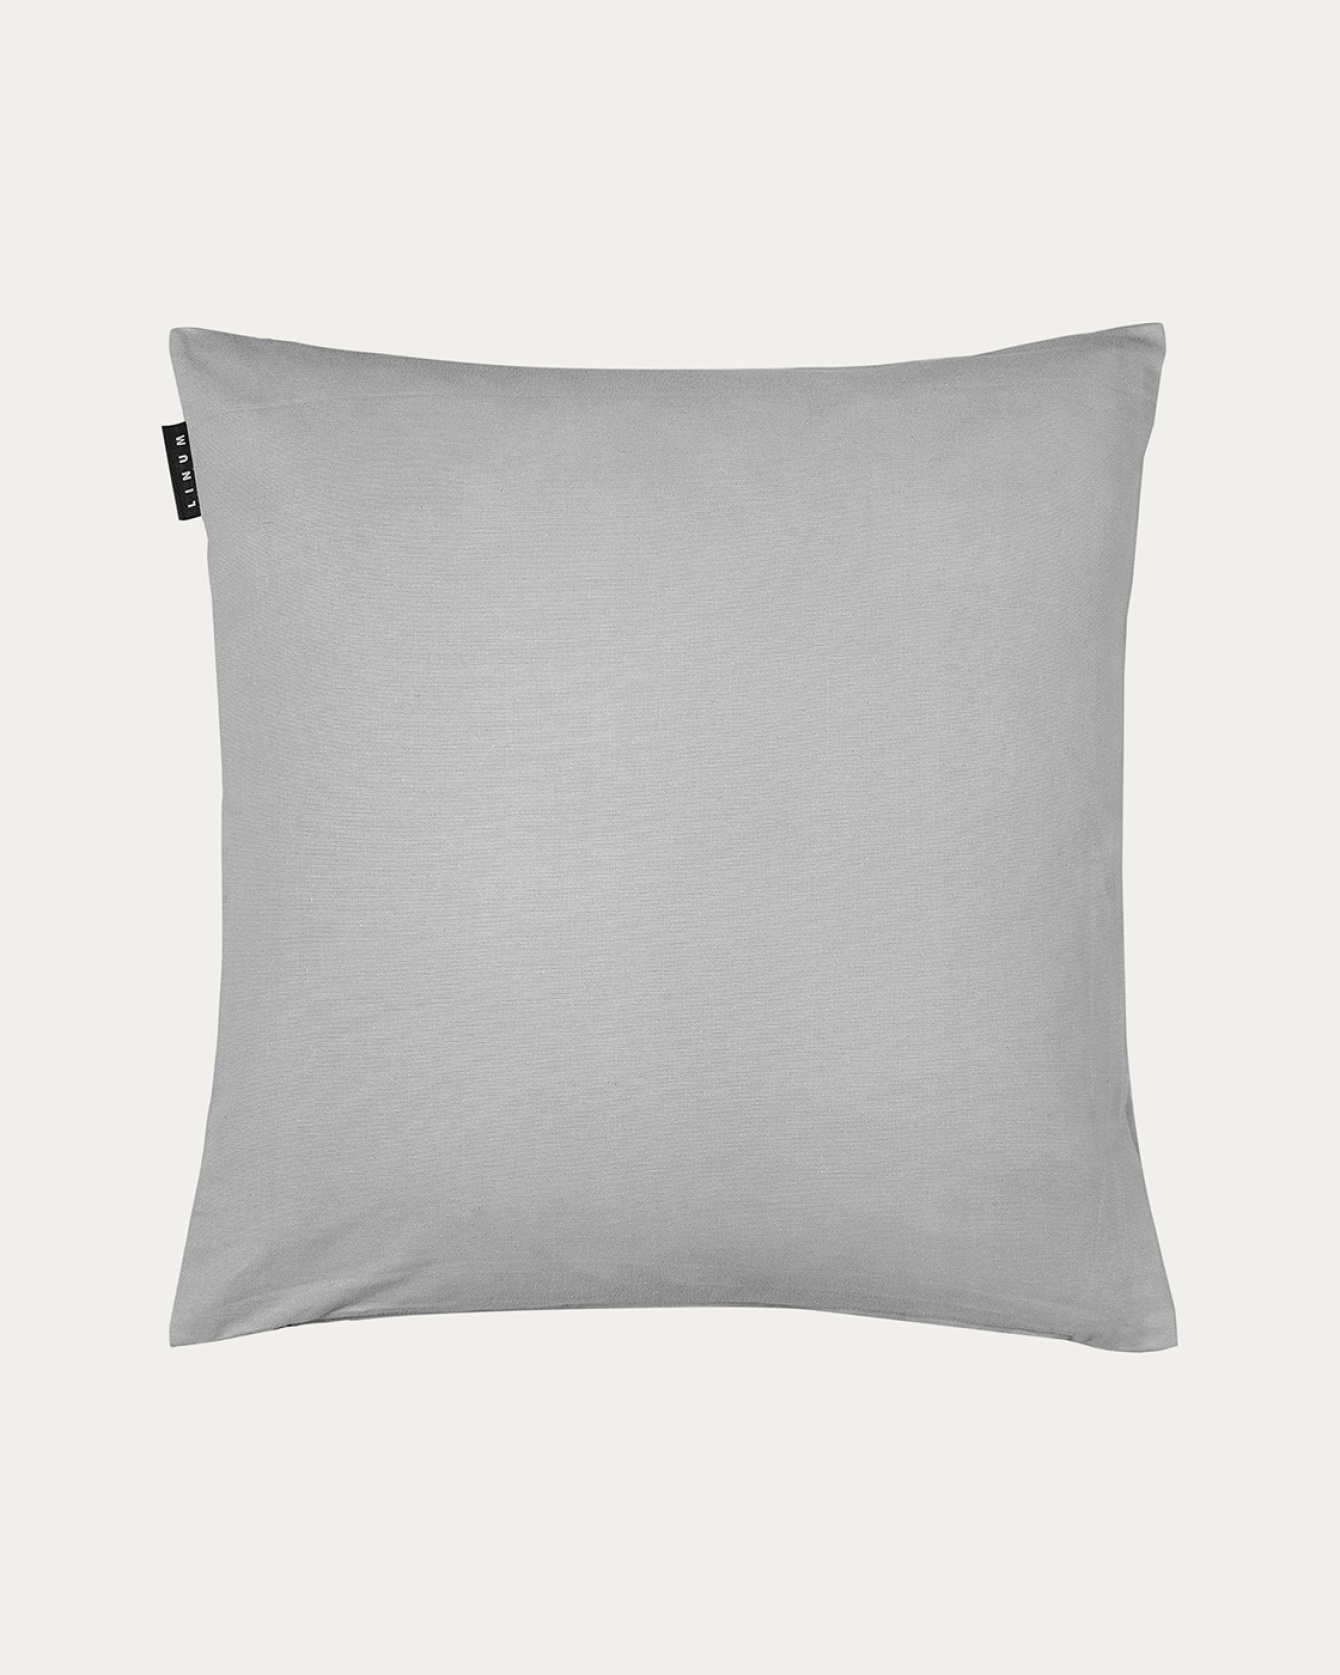 Product image light grey ANNABELL cushion cover made of soft cotton from LINUM DESIGN. Size 50x50 cm.